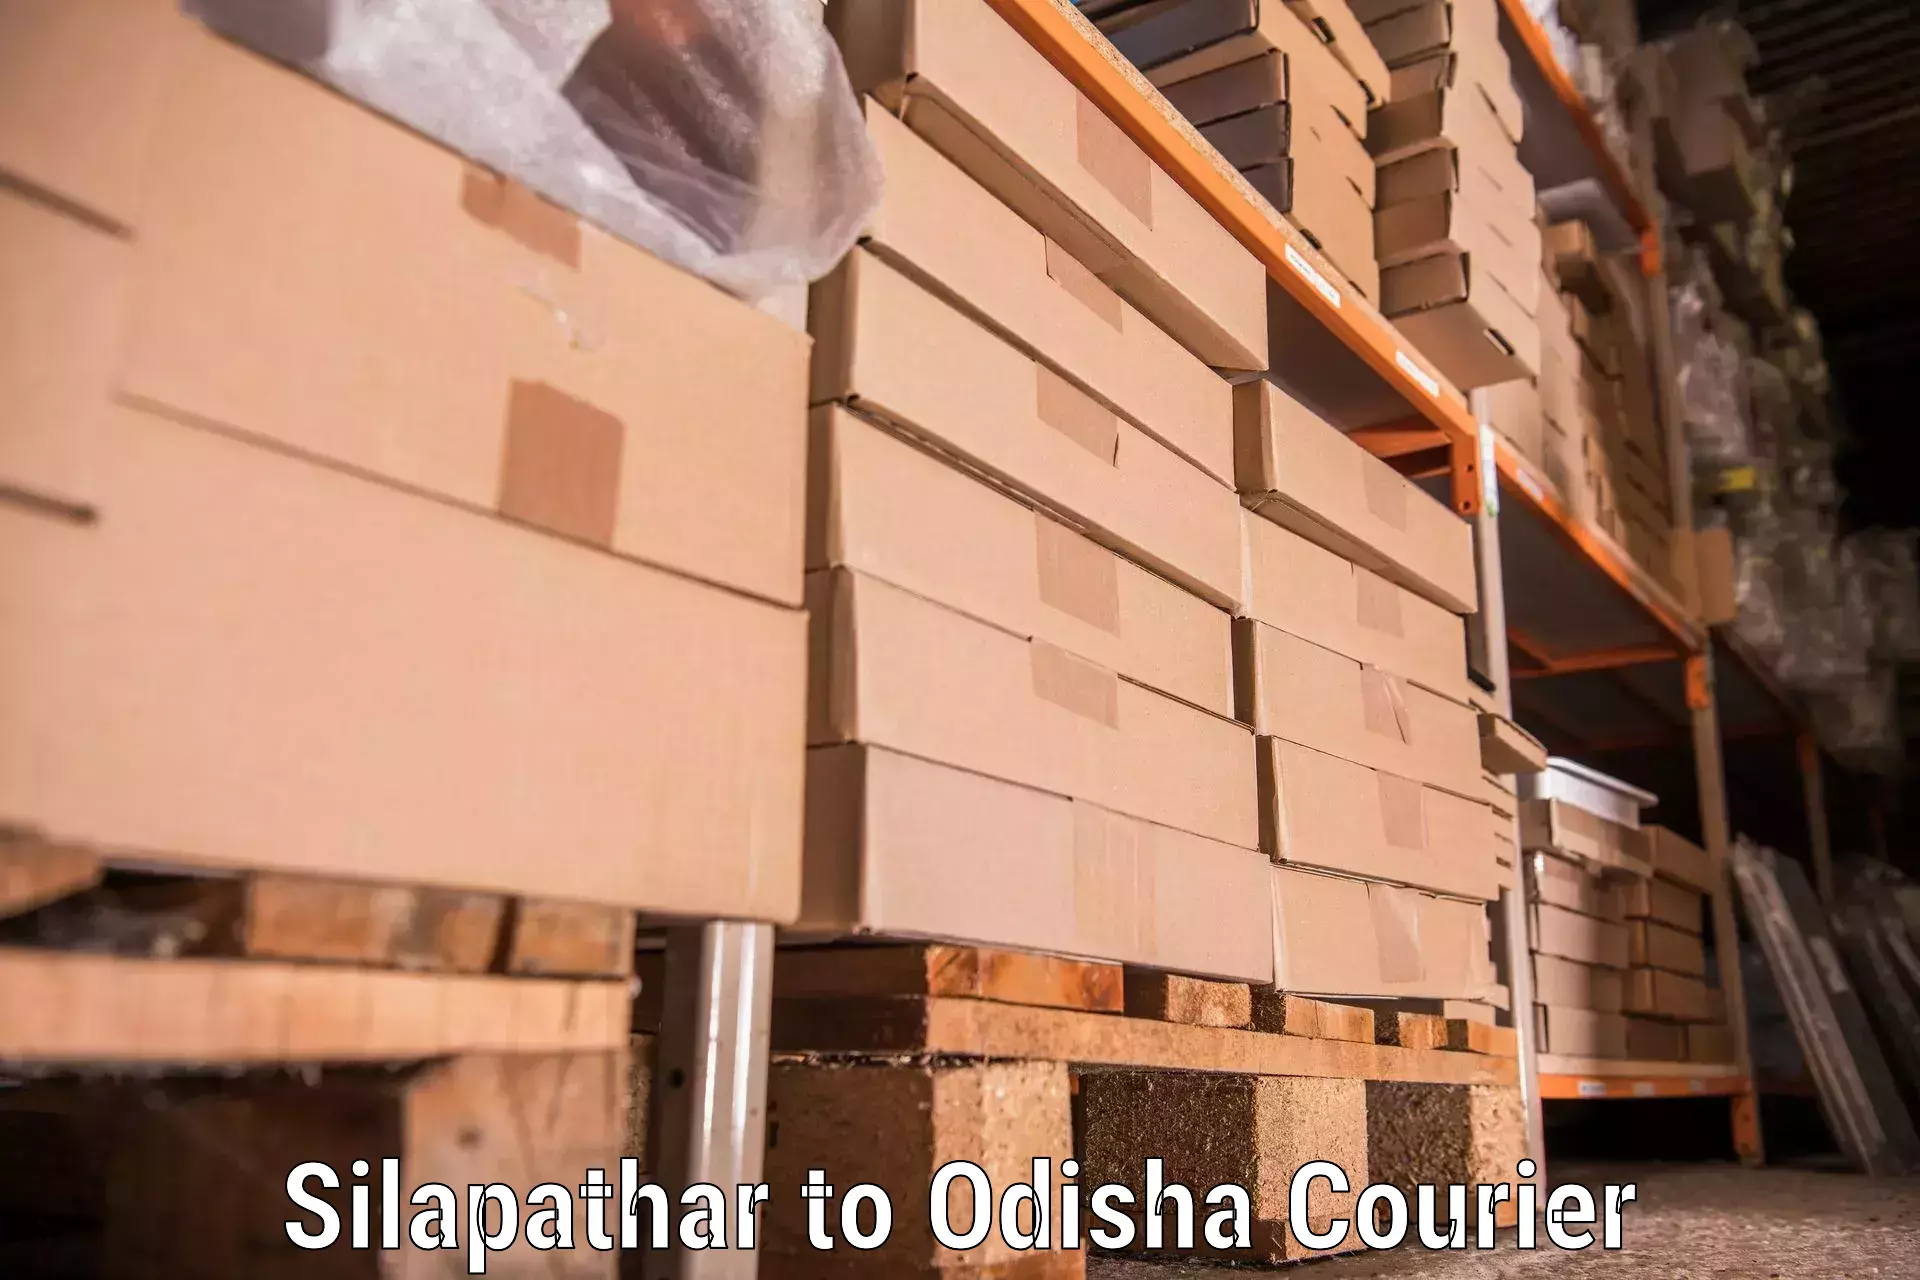 Moving and handling services Silapathar to Talcher